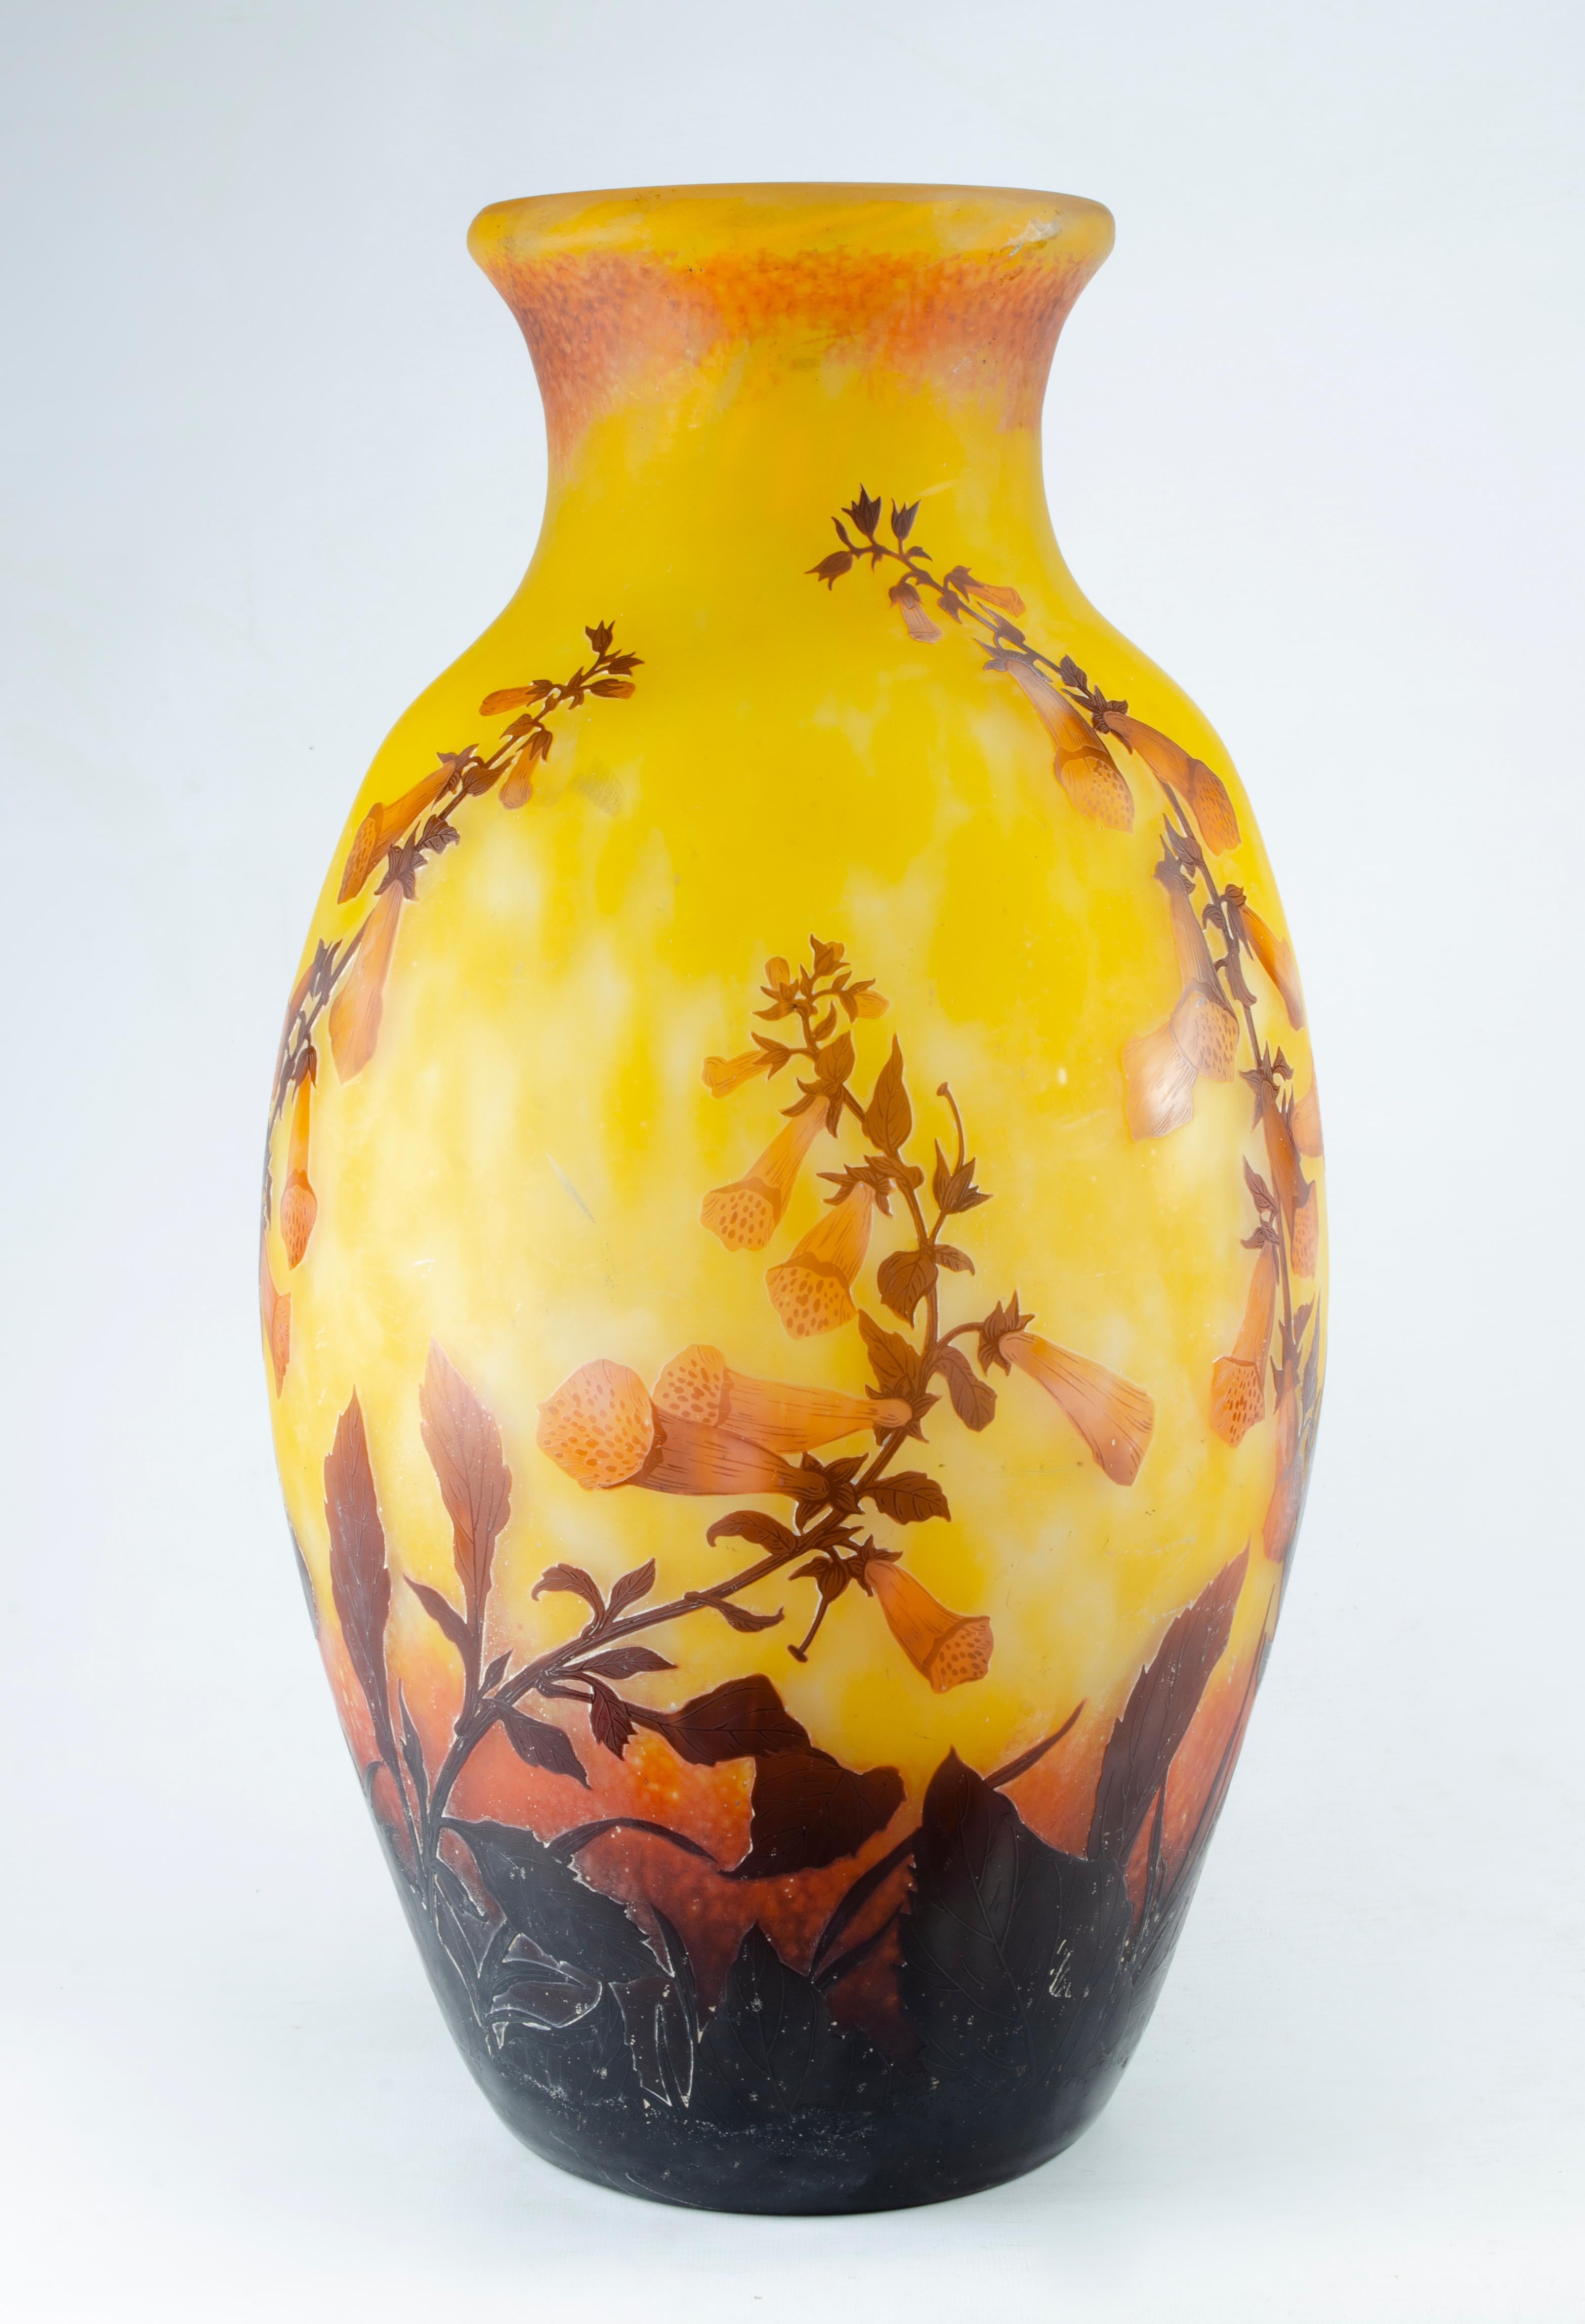 Daum Nancy vase 
Digitalis, Circa 1915
Perfect condition
Size: 54 cm
Monumental.

Glassware marked Daum Nancy is attributed to Auguste and Antonin Daum. These brothers took over a glass factory owned by their father Jean Daum located in Nancy,